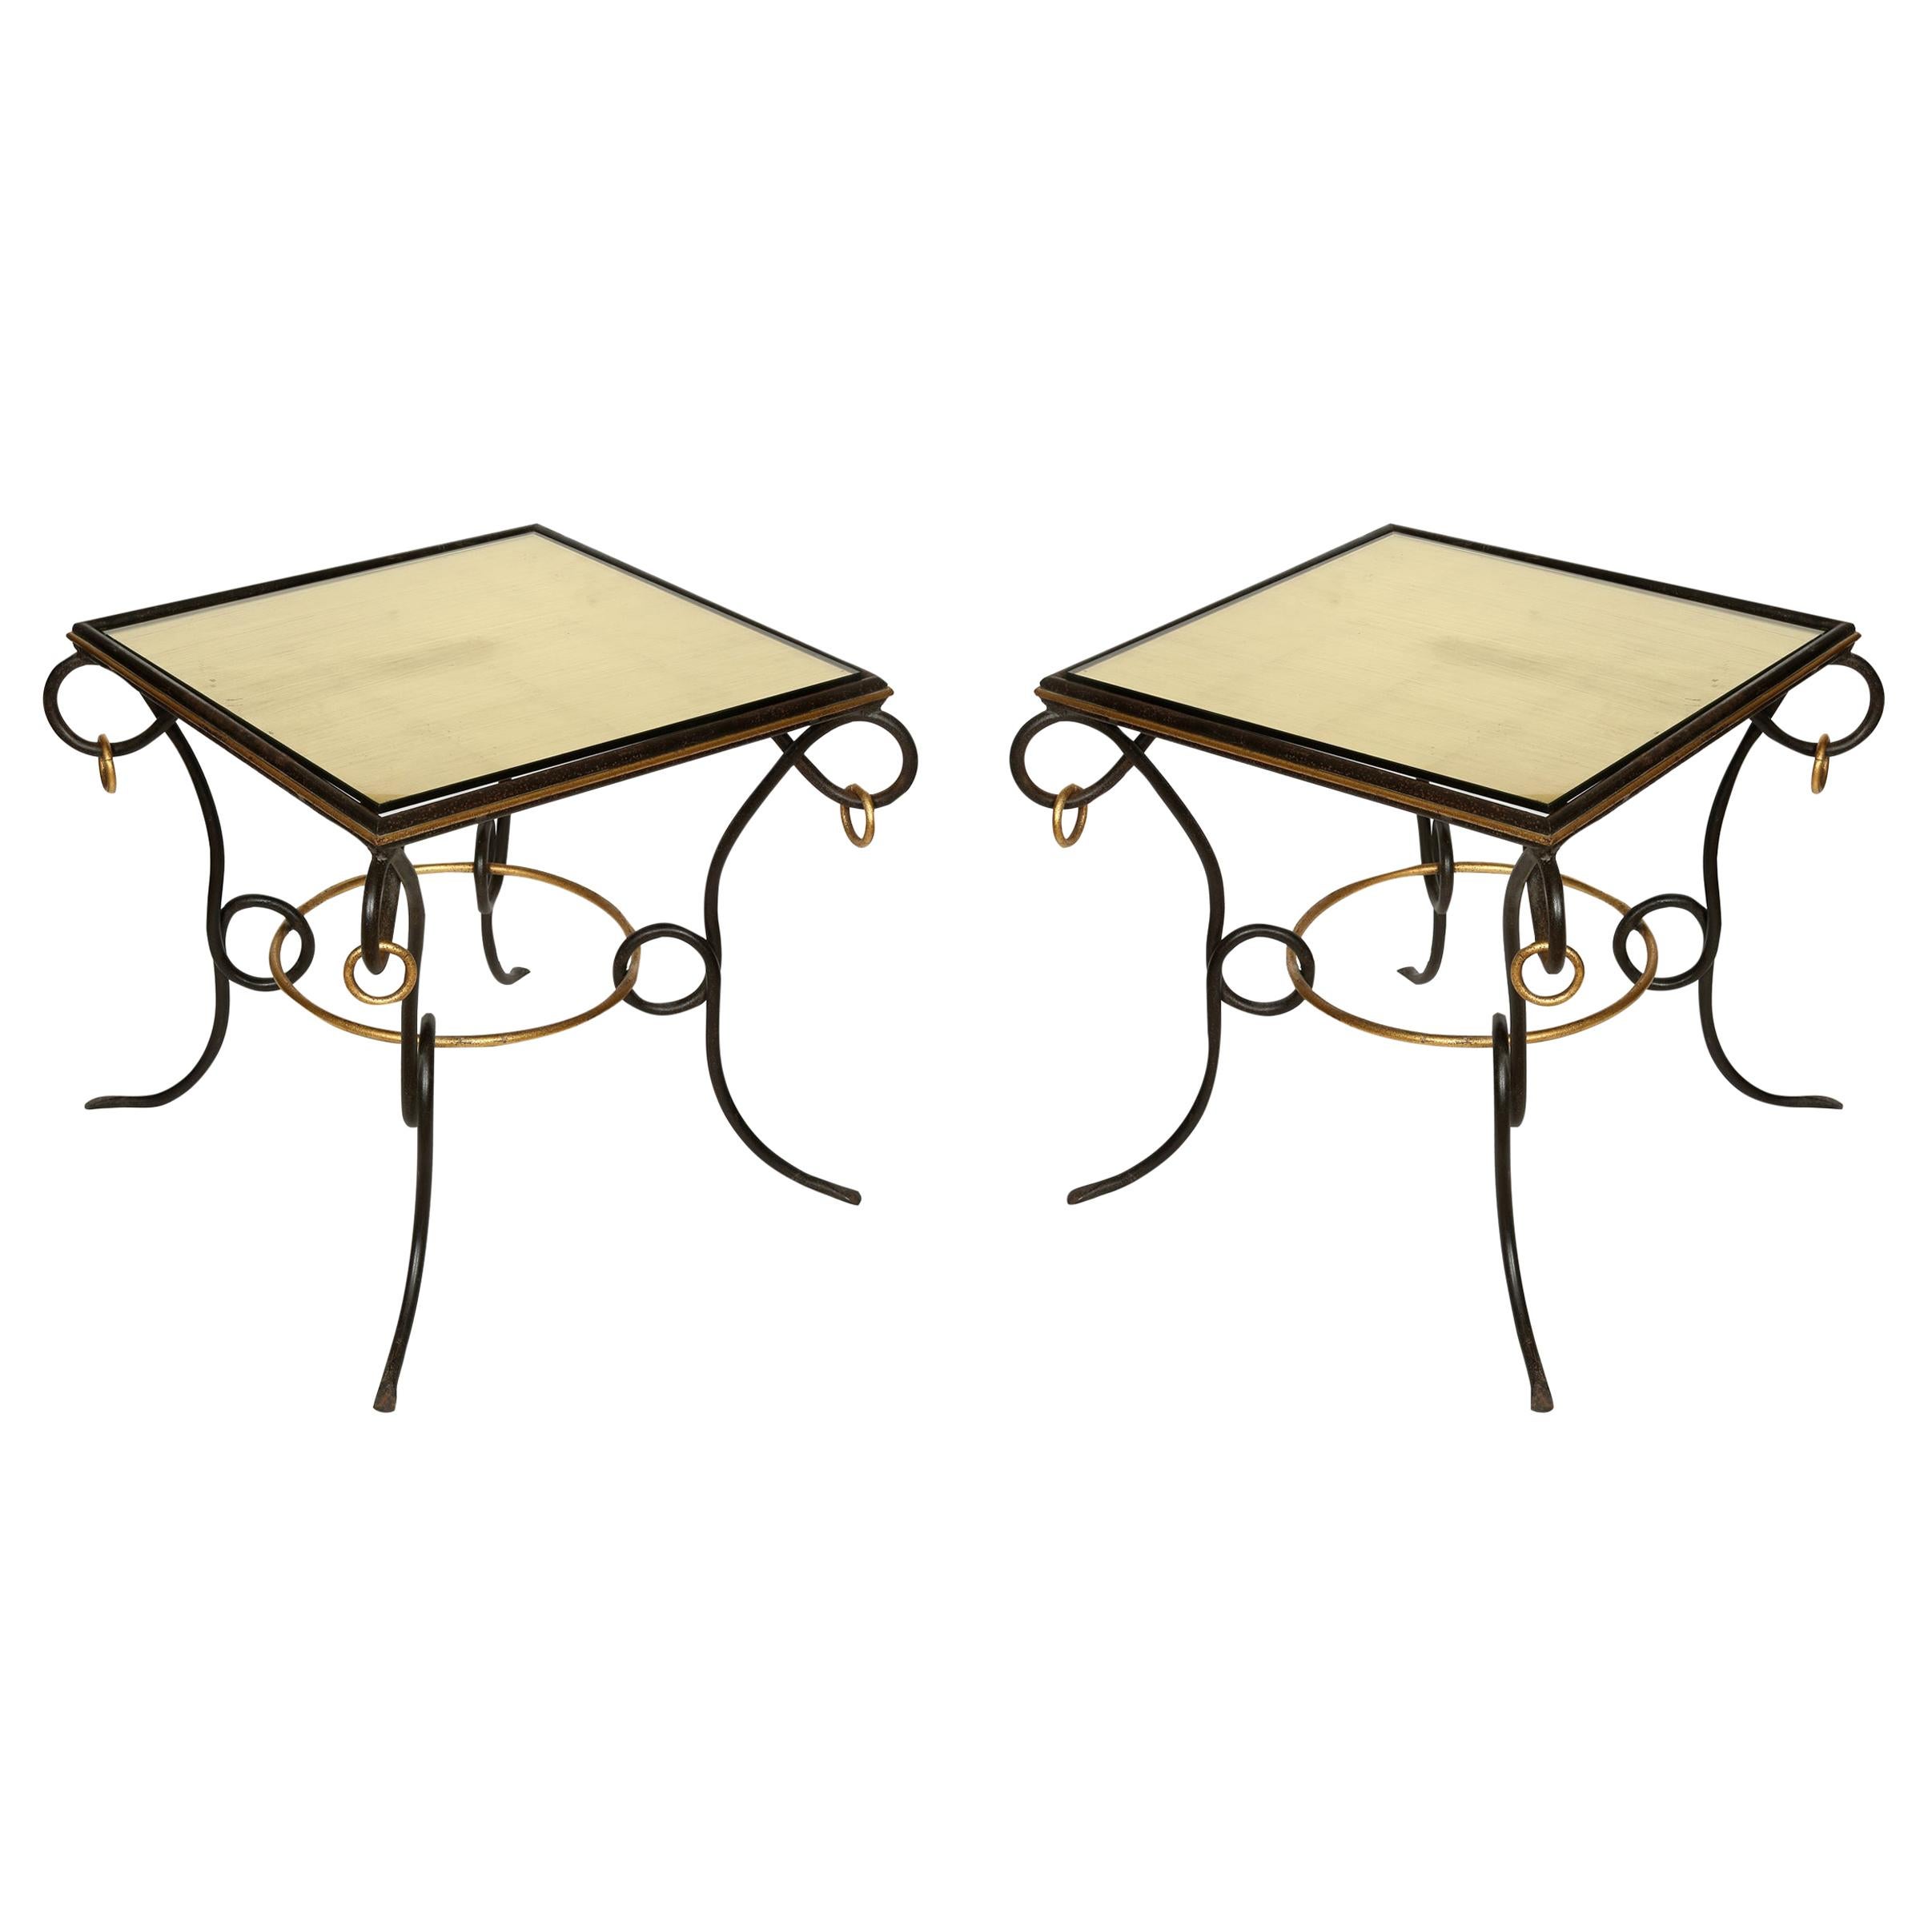 Pair of Iron and Gilt End Tables Attributed to René Prou